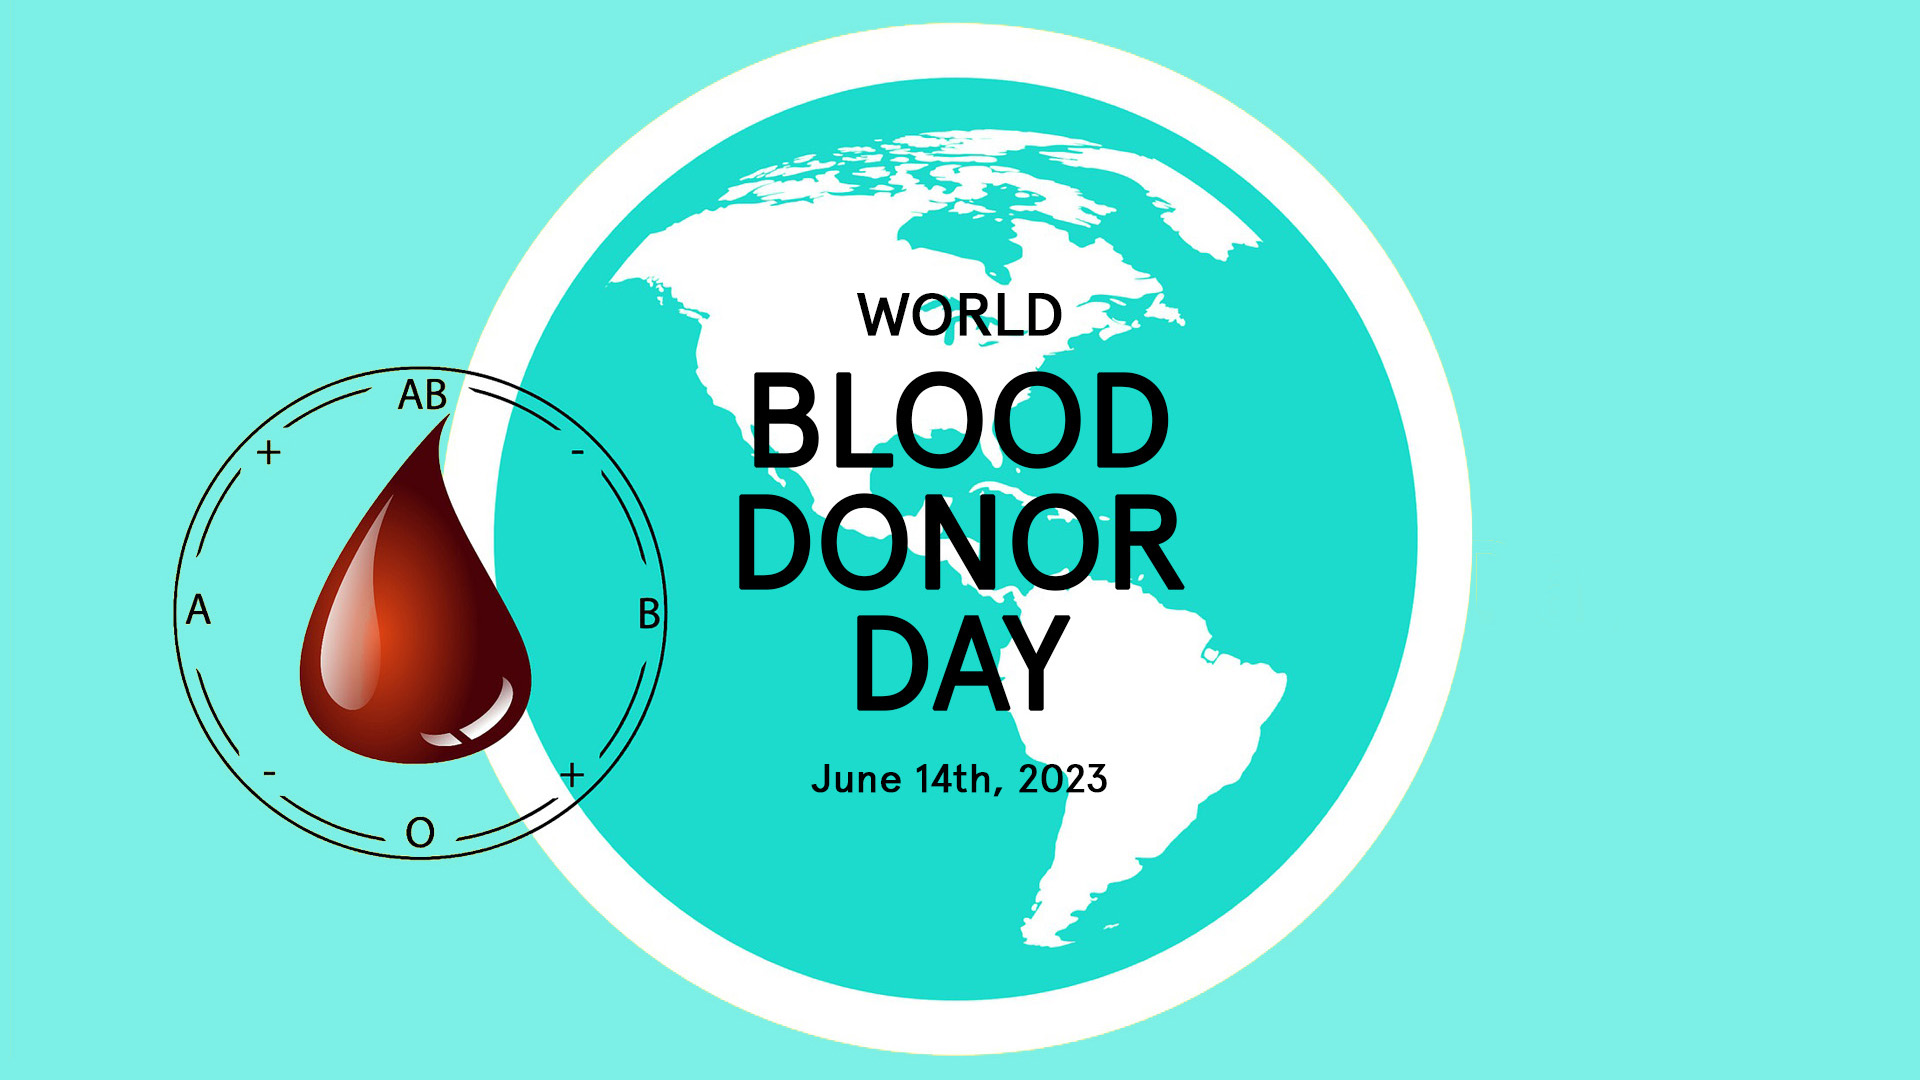 Teal blue background of the earth with World Blood Donor Day written in black text and in the center of the screen. illustrated blood drop with different blood types to the left of the graphic